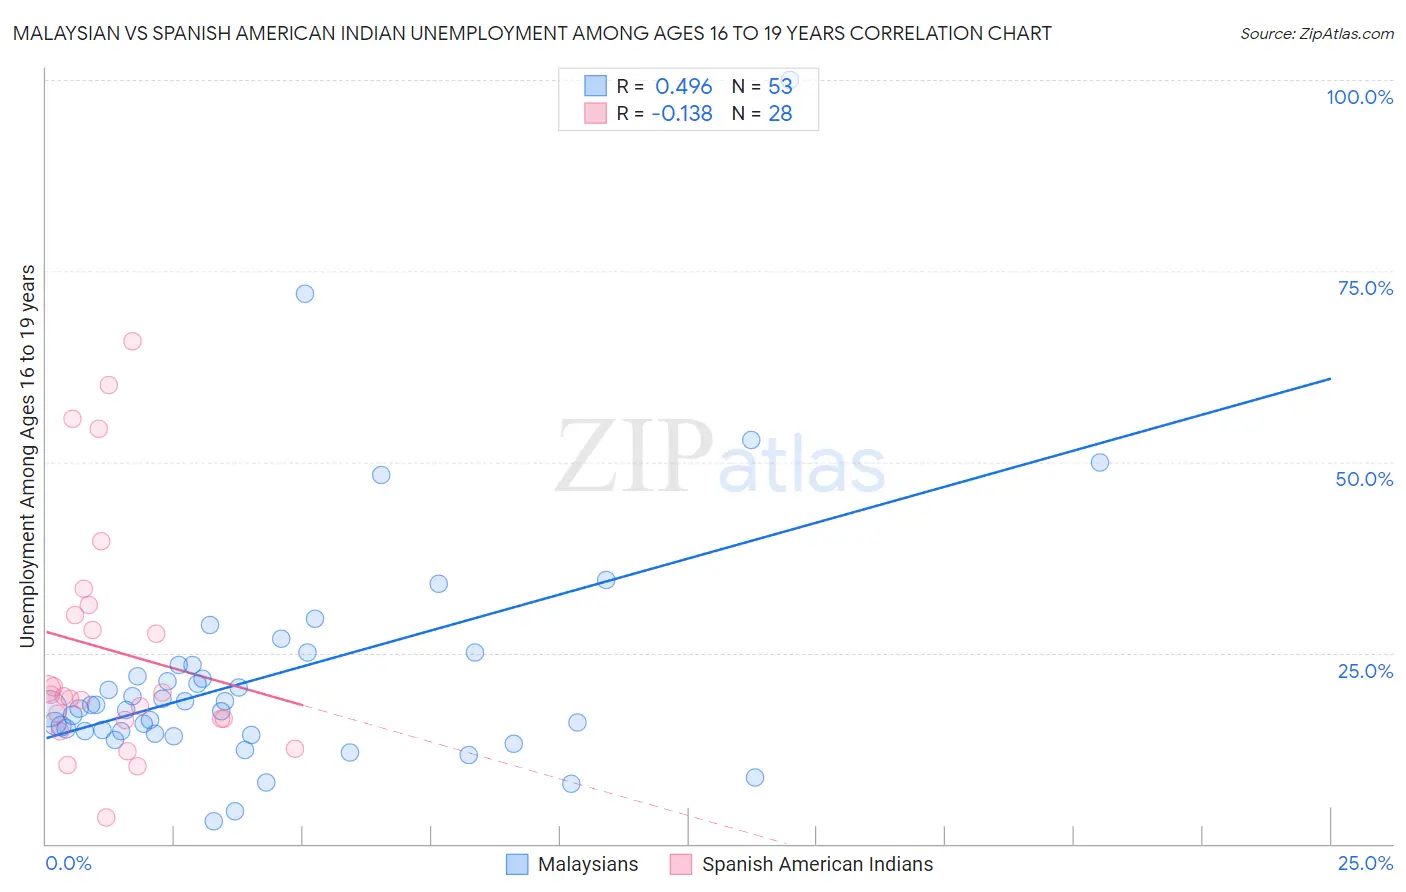 Malaysian vs Spanish American Indian Unemployment Among Ages 16 to 19 years